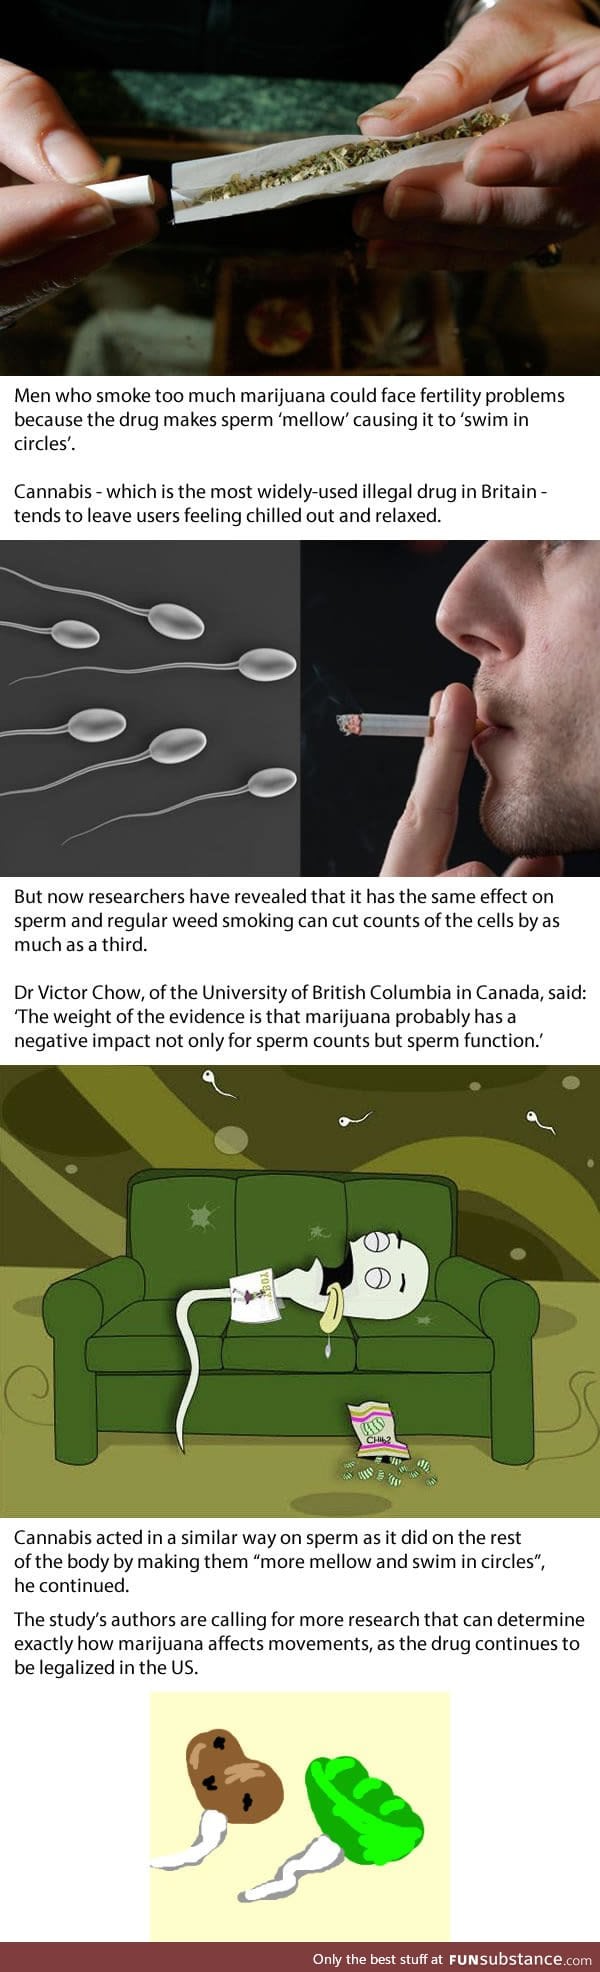 Smoking Weed May Cause Infertility Because It Makes Men's Sperm Lazy